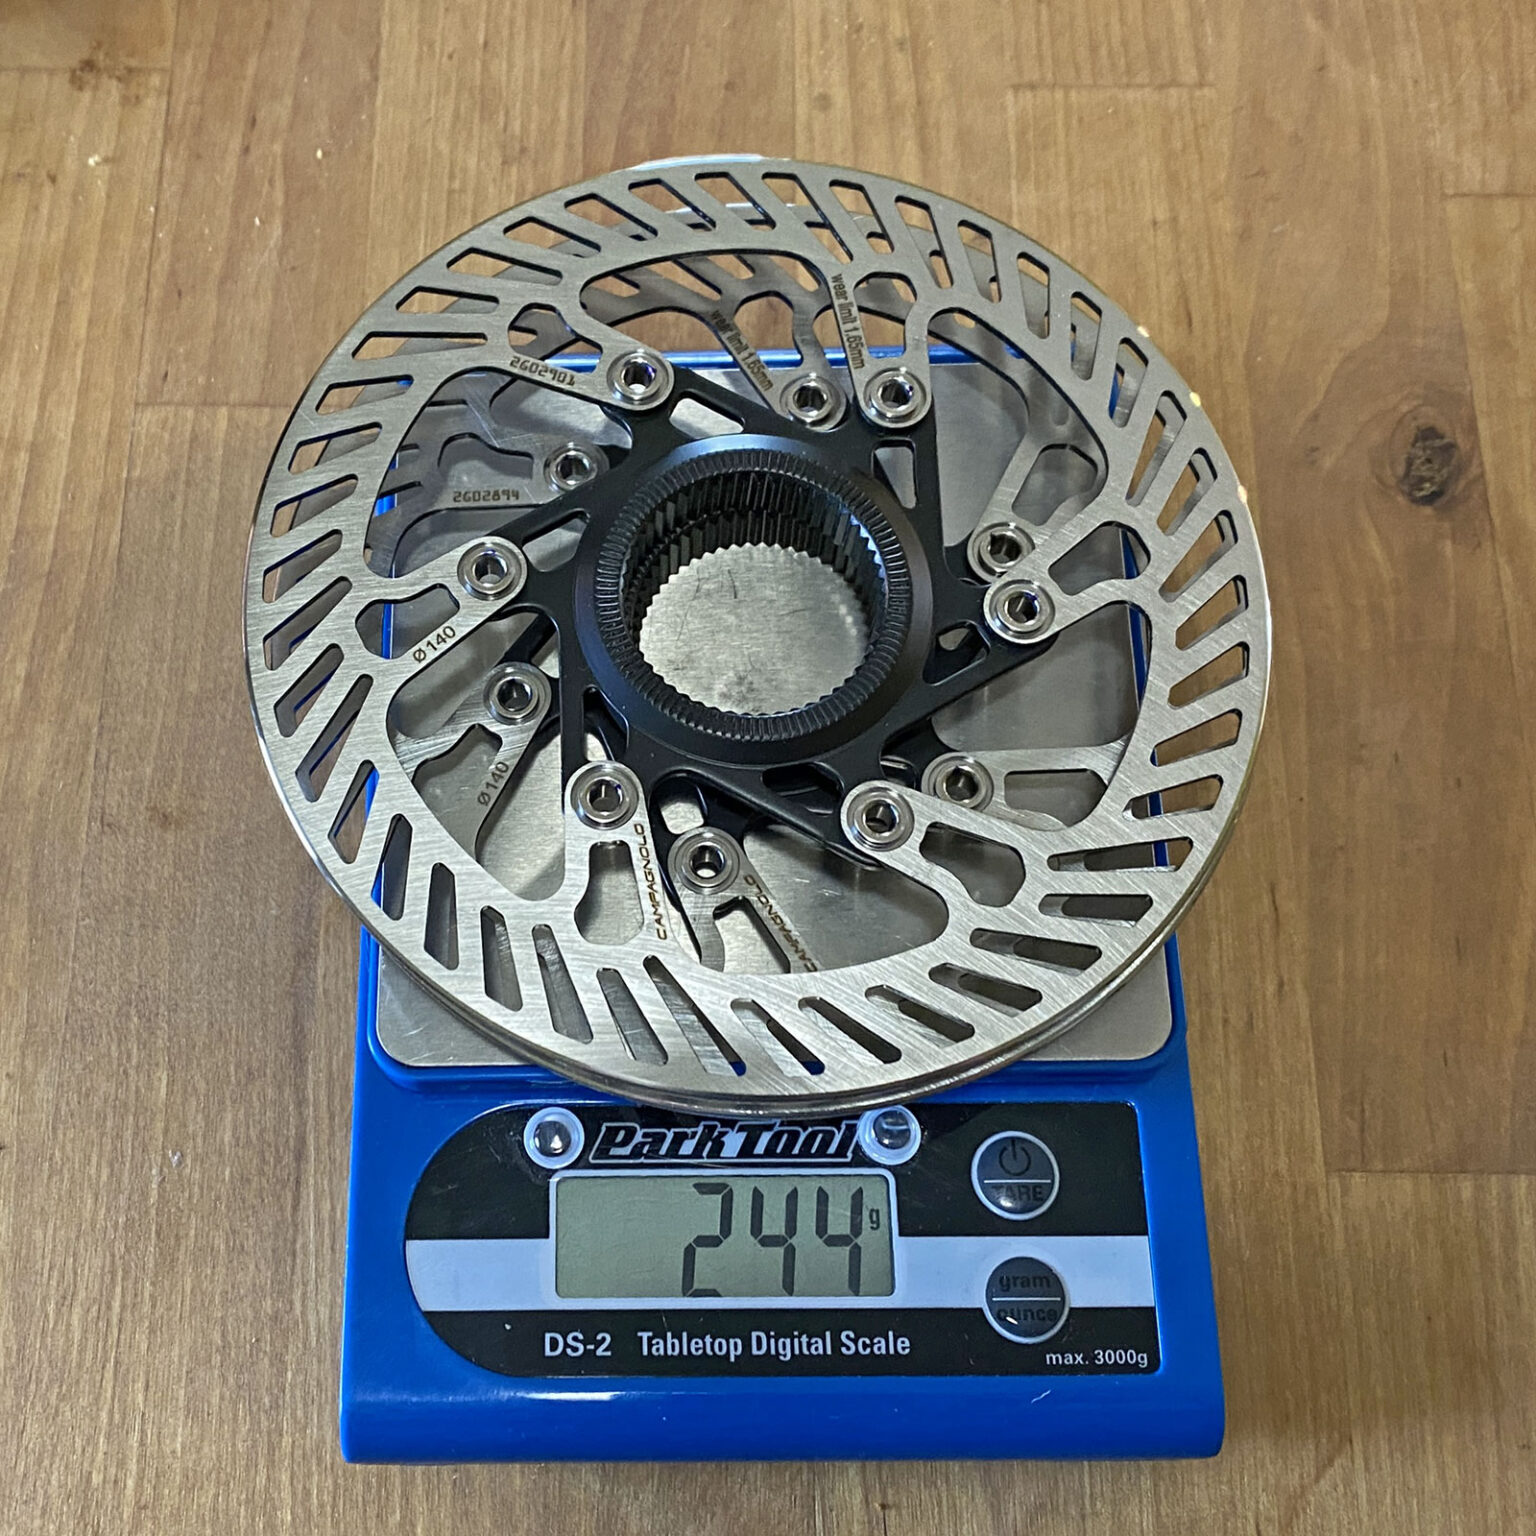 Campagnolo Ekar GT actual weights, affordable Campy gravel group, 140mm rotors